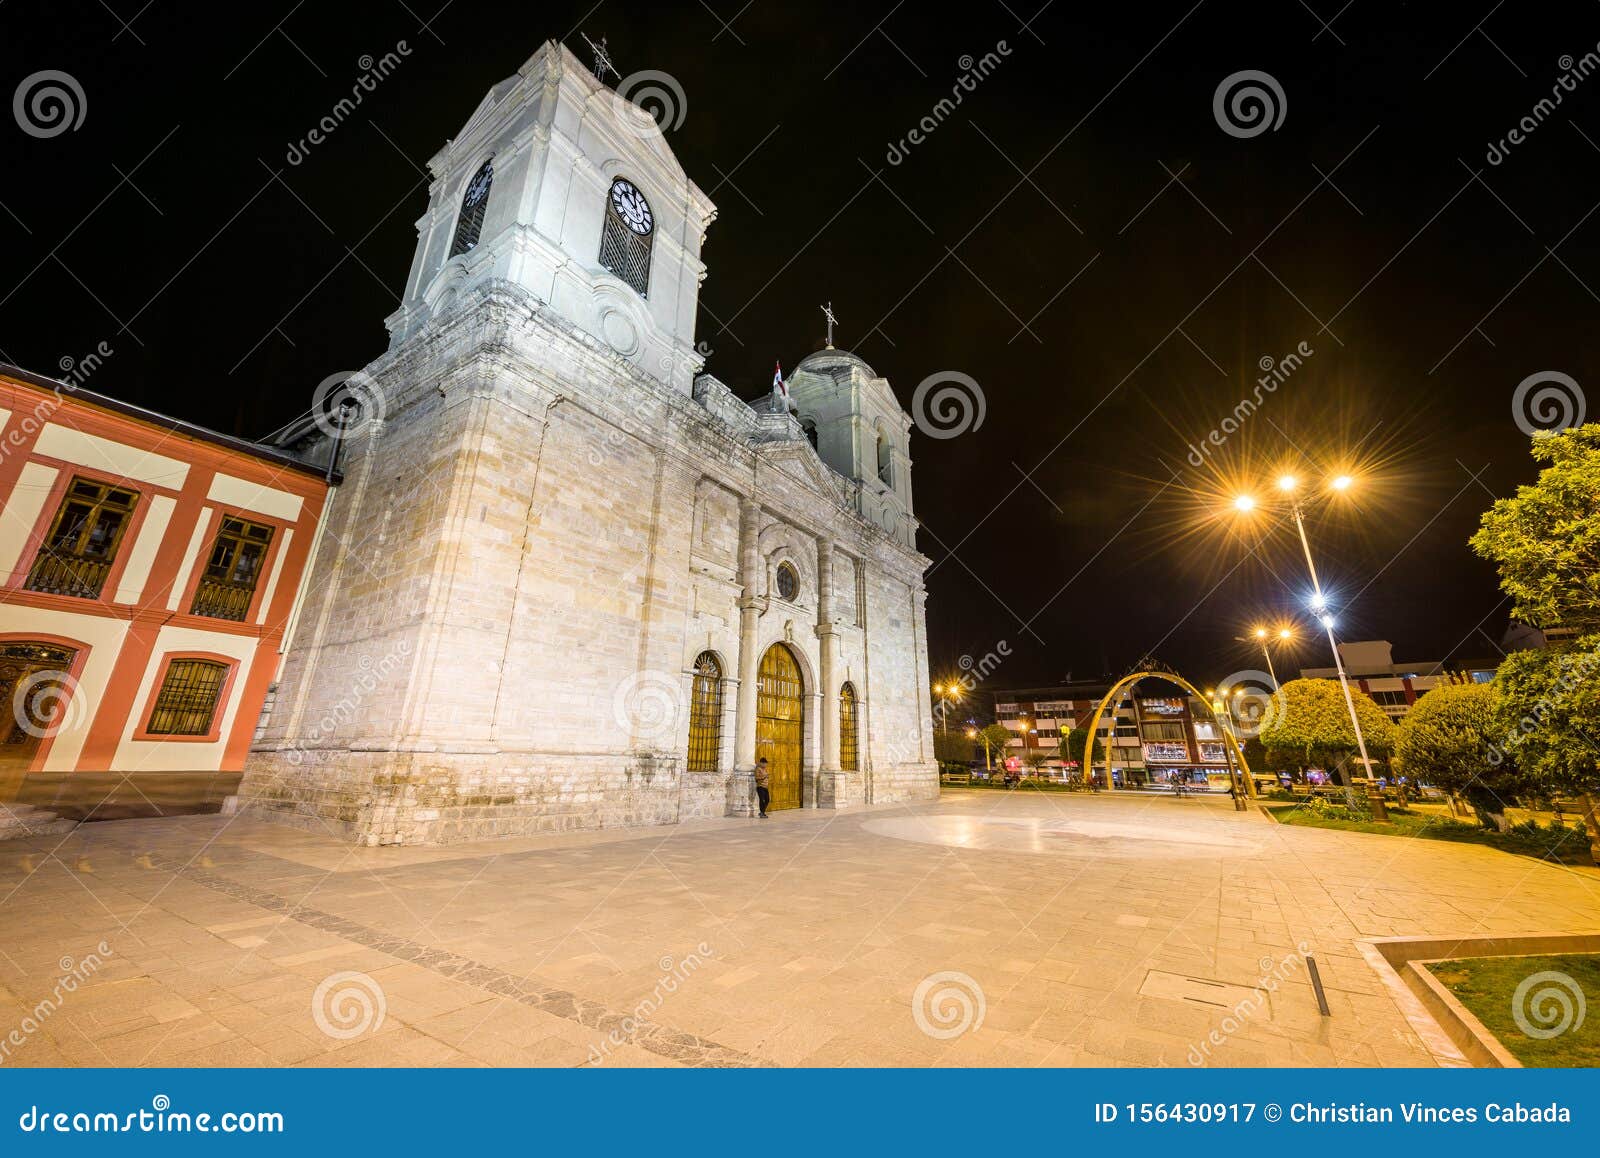 night view of the cathedral of huancayo in peru